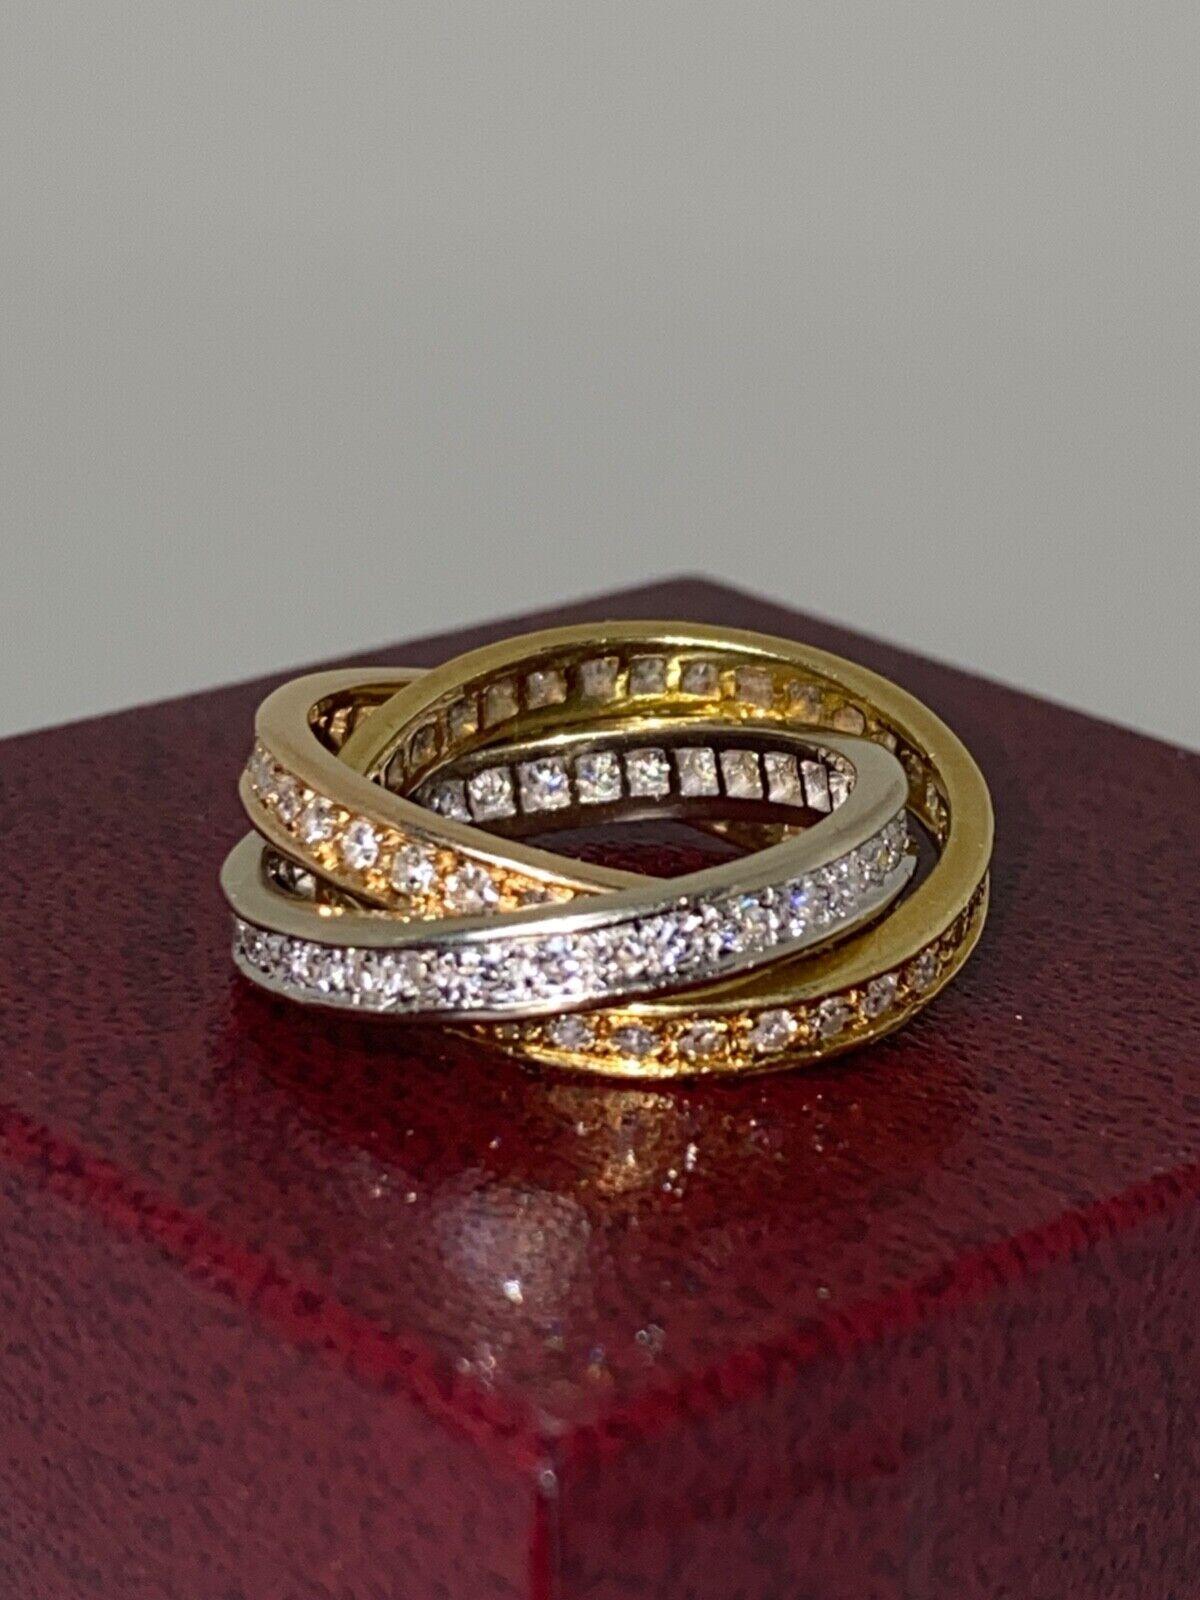 Iconically designed as Cartier style Russian wedders, 
exquisitely crafted in 18K tri-coloured gold (white, yellow & rose), 
this Trinity Ring is handmade in France 
(bearing French hallmark)

Each band is an eternity band - which is not only highly